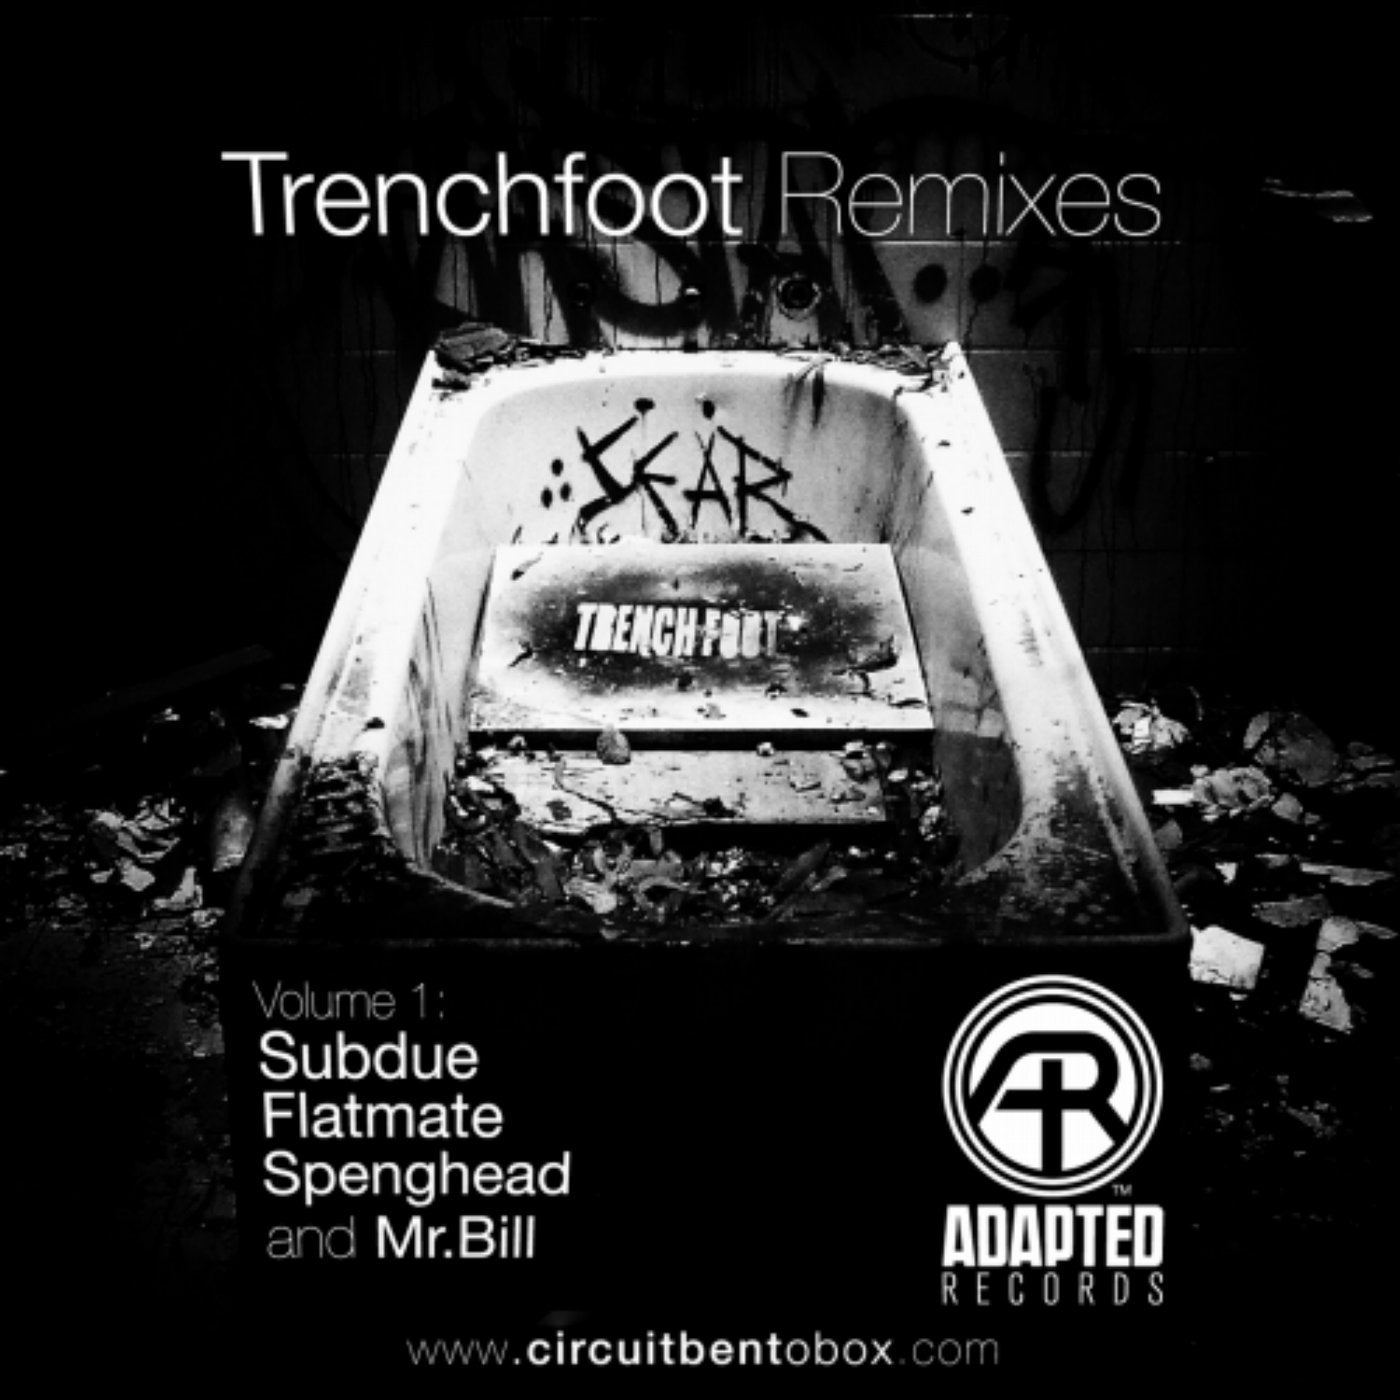 Trenchfoot Remixes